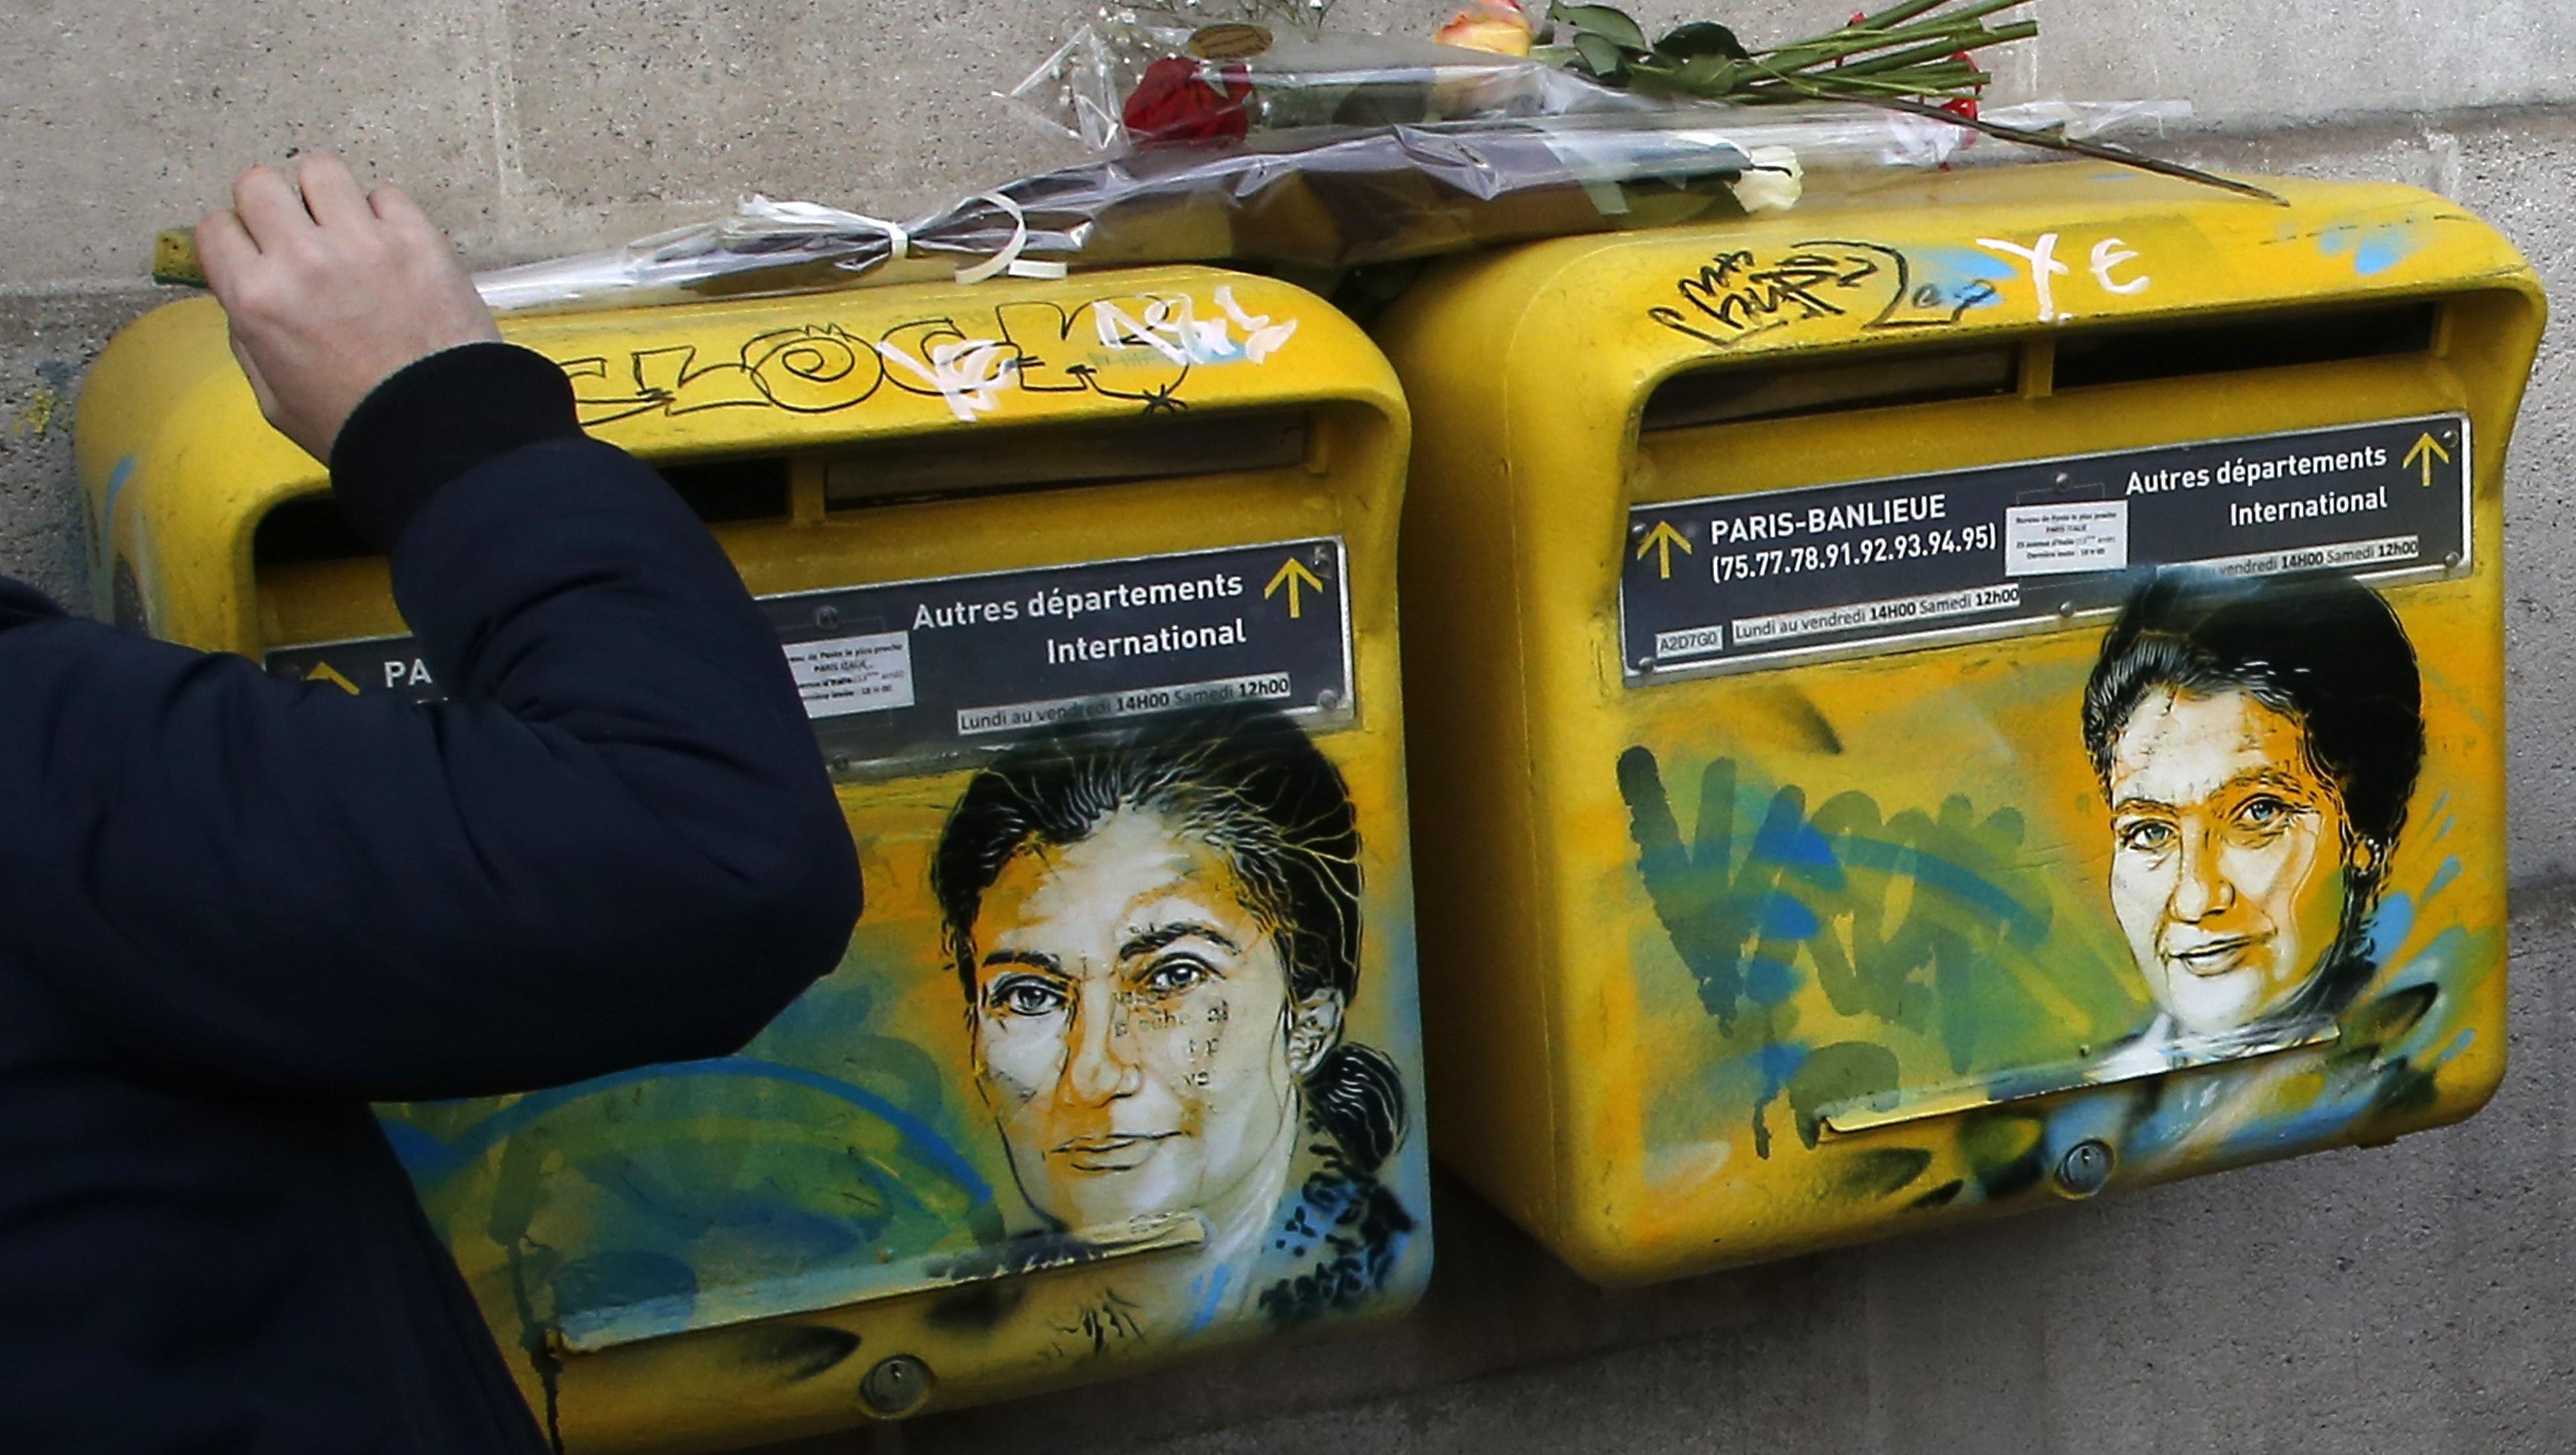 French street artist Christian Guemy, known as C215, cleans the vandalized mailboxes with swastikas covering the face of the late Holocaust survivor and renowned French politician, Simone Veil, in Paris, Tuesday Feb.12, 2019. According to French authorities, the total of registered anti-Semitic acts rose to 541 in 2018 from 311 in 2017, a rise of 74 percent.